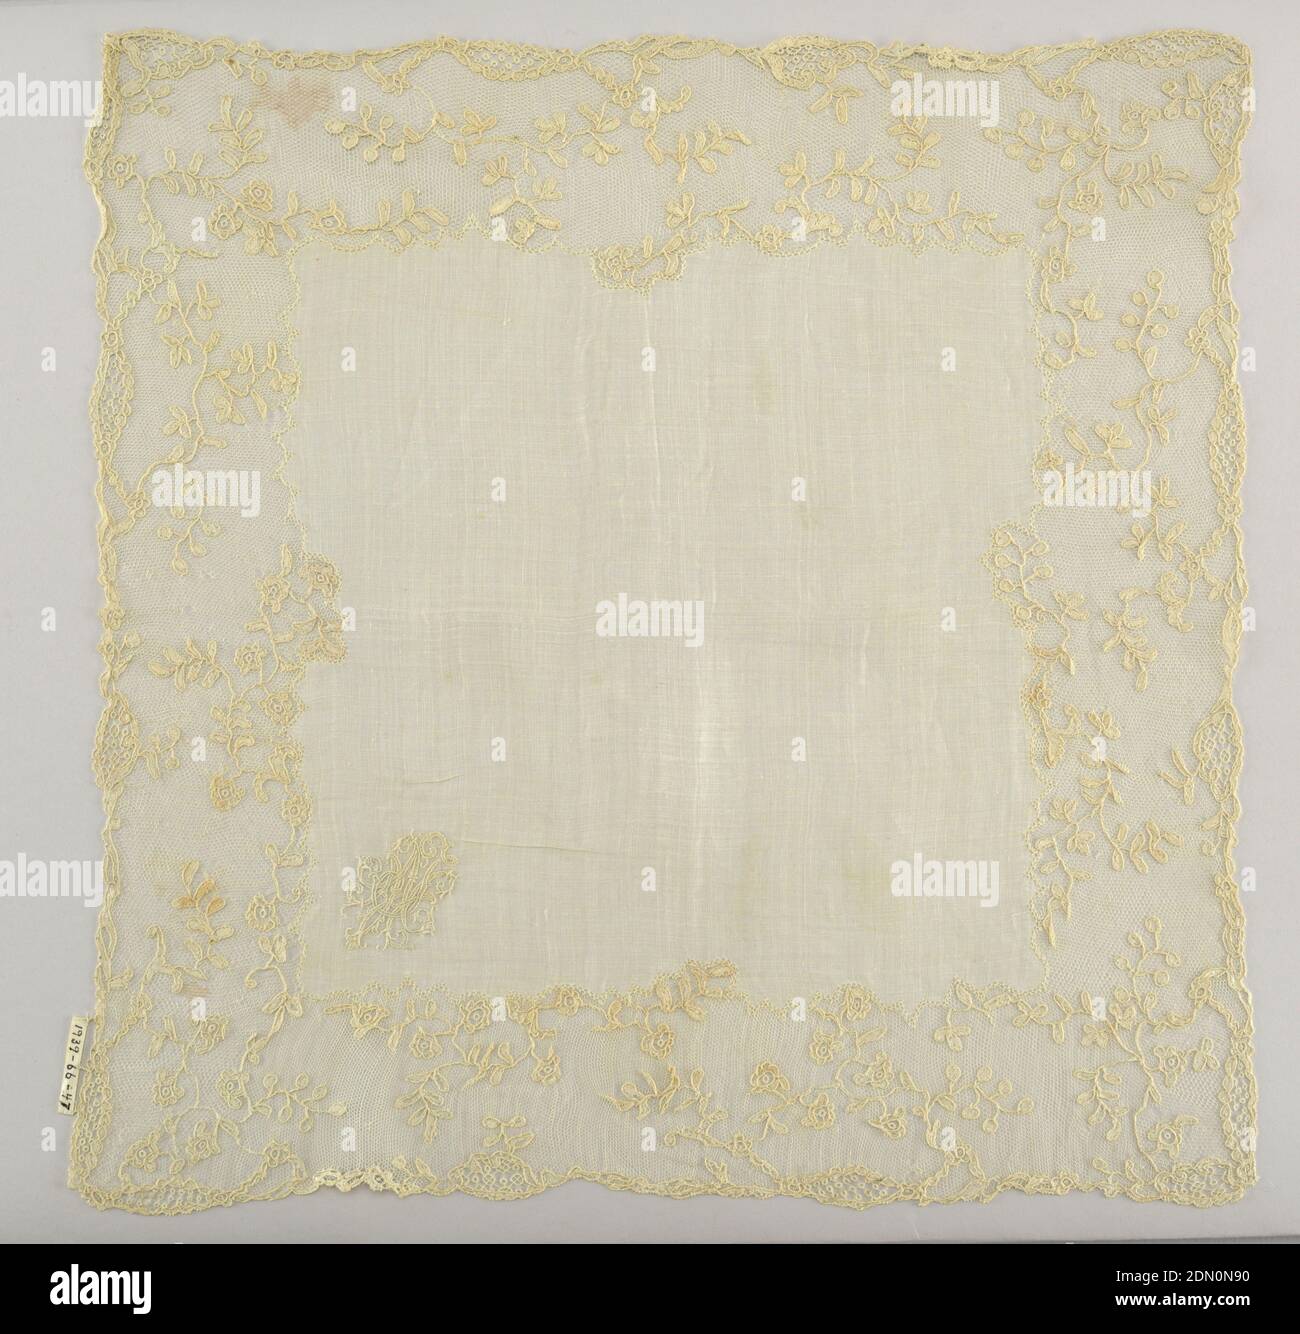 Handkerchief, Medium: linen Technique: embroidered with lace border, Linen center with monogram J.M.N. and border of Mechlin lace in design of pendant flowers., France, 18th century, lace, Handkerchief Stock Photo